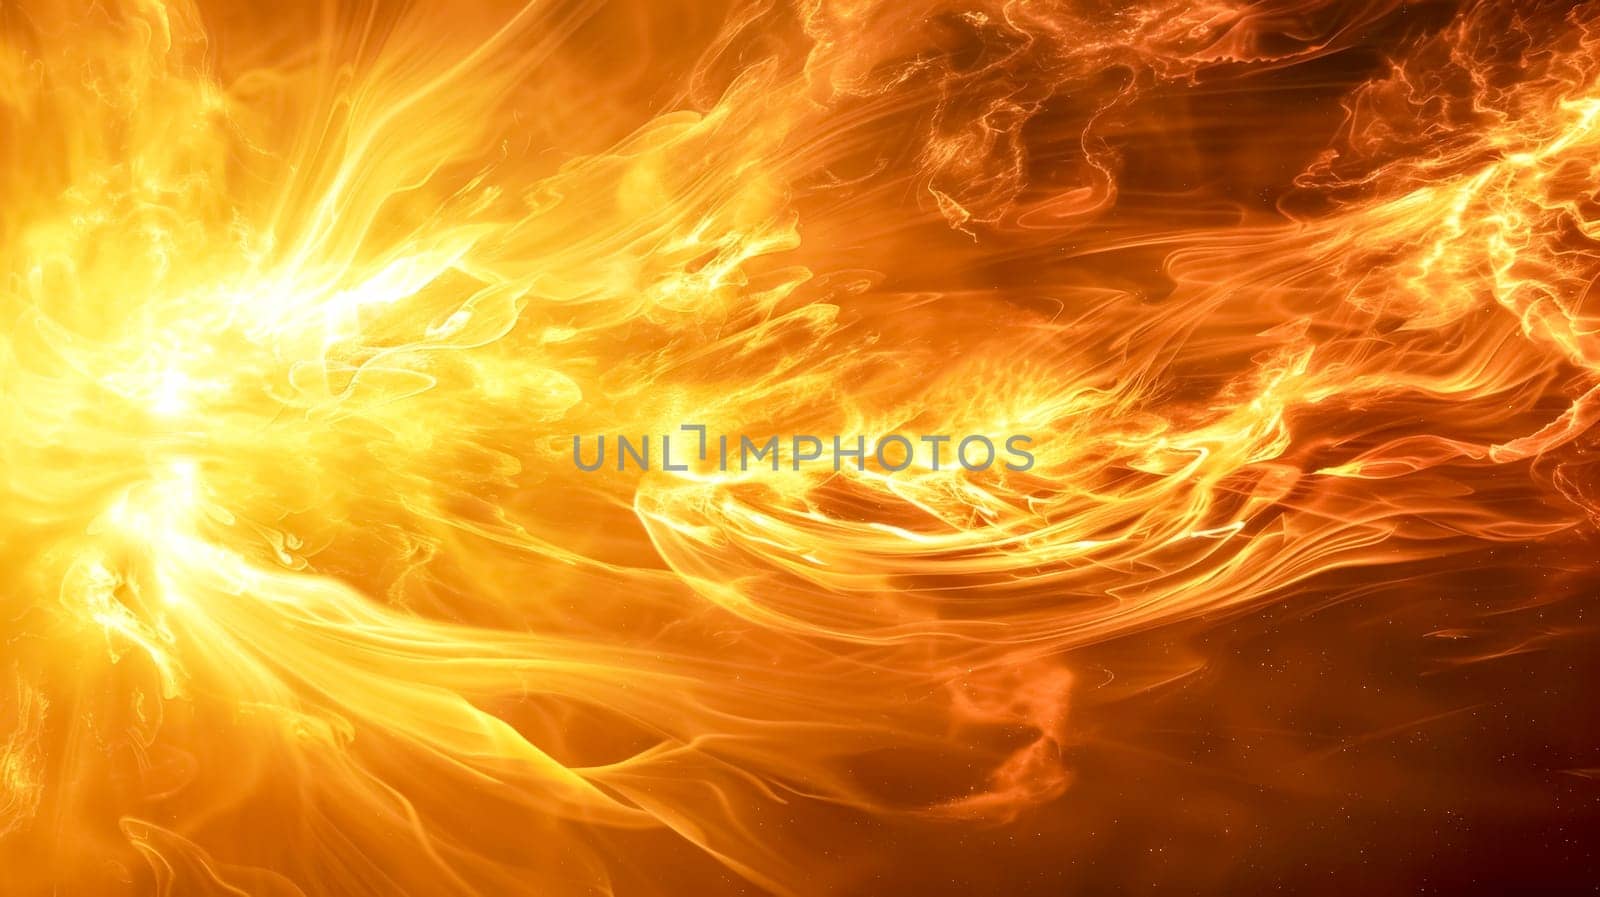 Vibrant and dynamic abstract fiery energy background with swirling flames and intense glowing orange colors